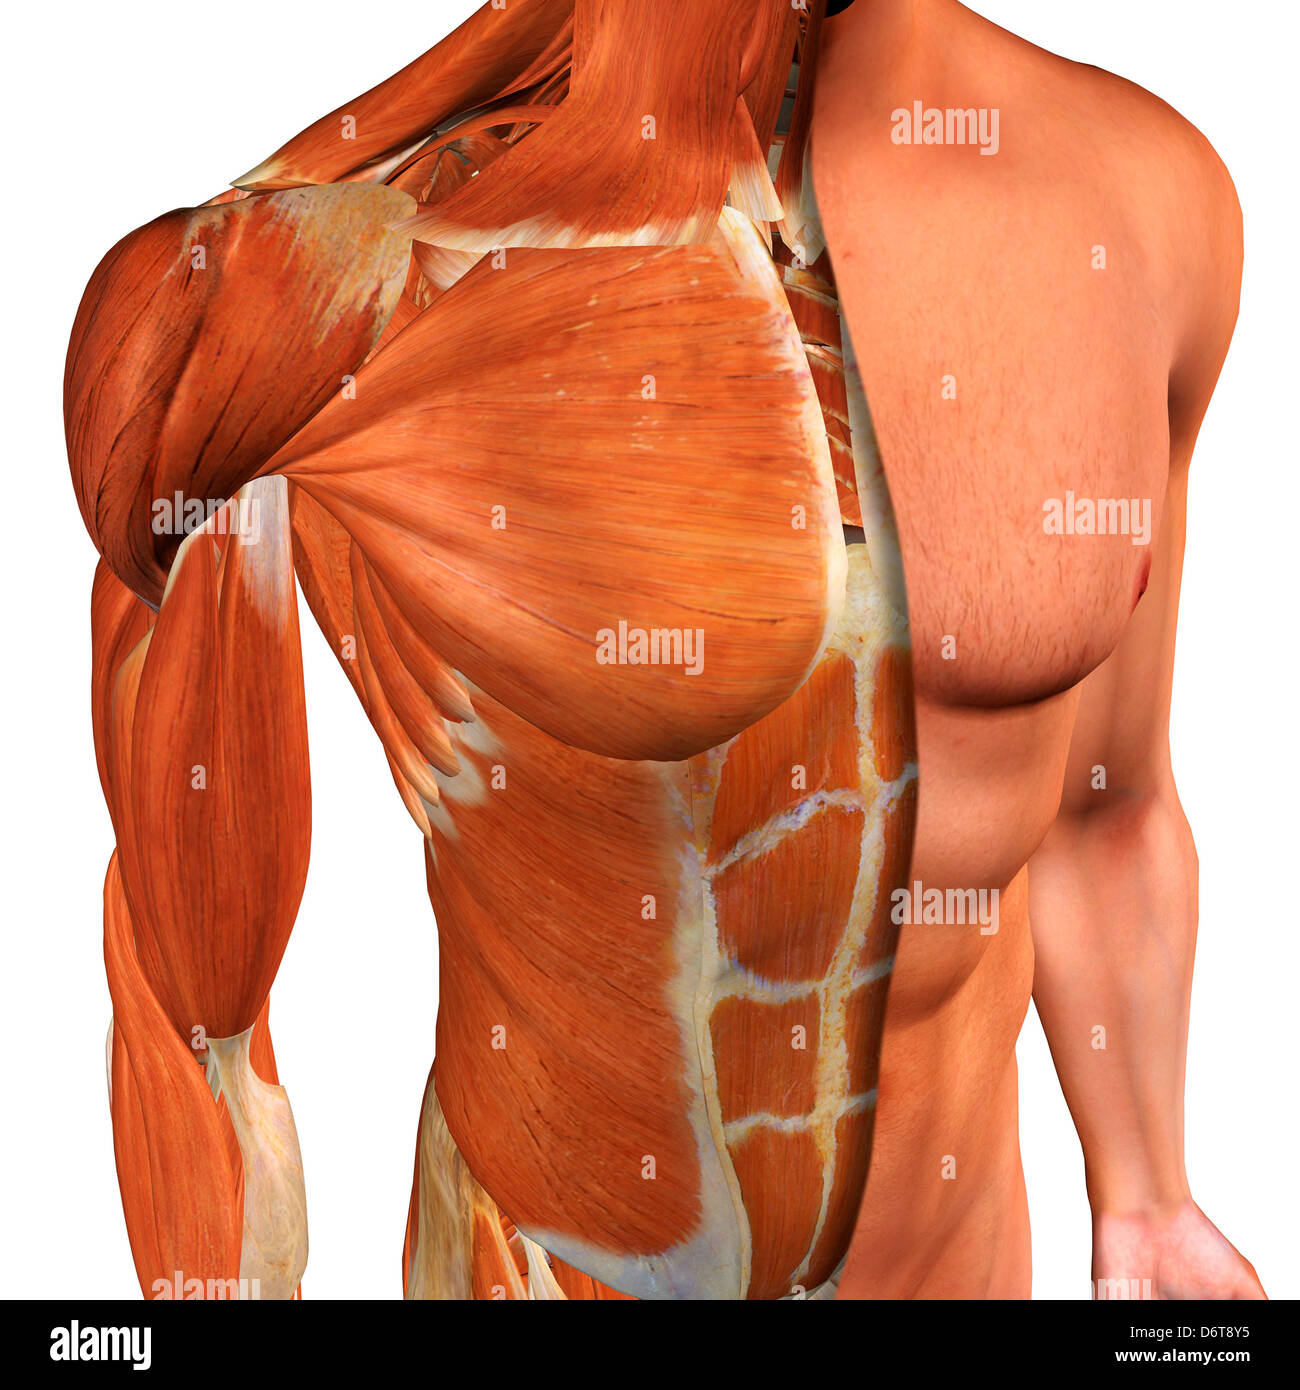 Cross-section anatomy of male chest, abdomen and groin muscles Stock Photo  - Alamy